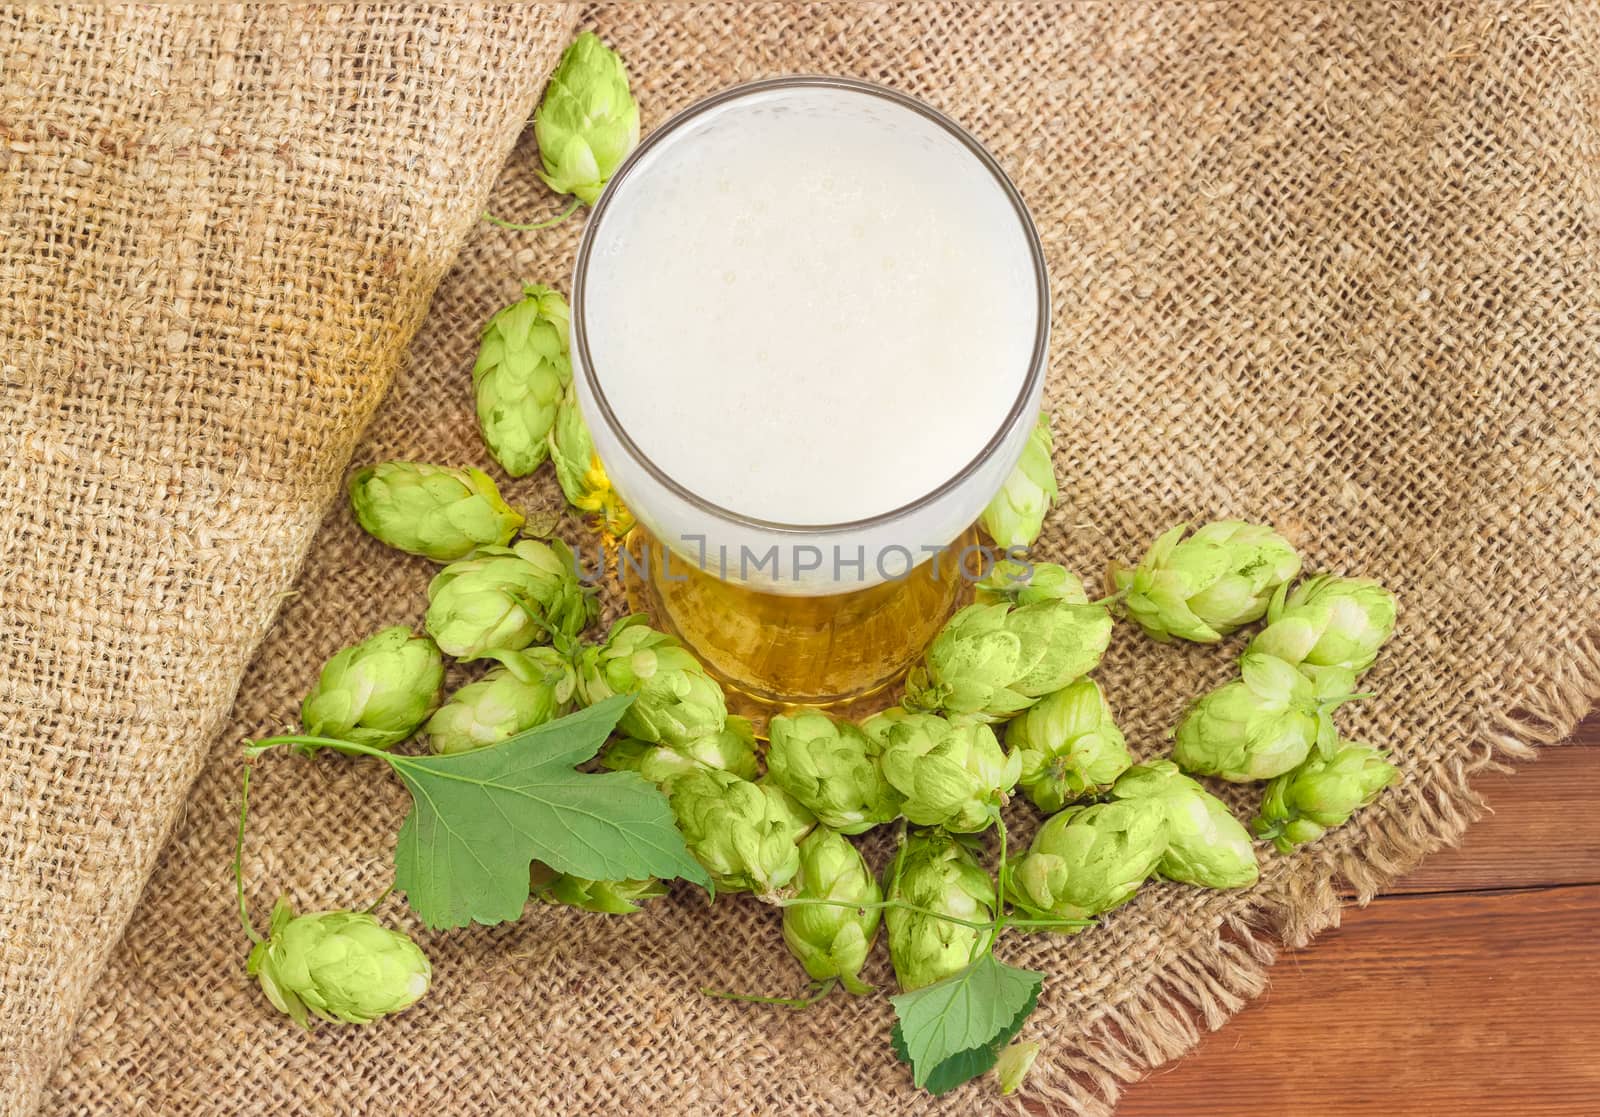 Top view of beer glass with lager beer among of hop cones with leaves on a sackcloth on wooden surface
